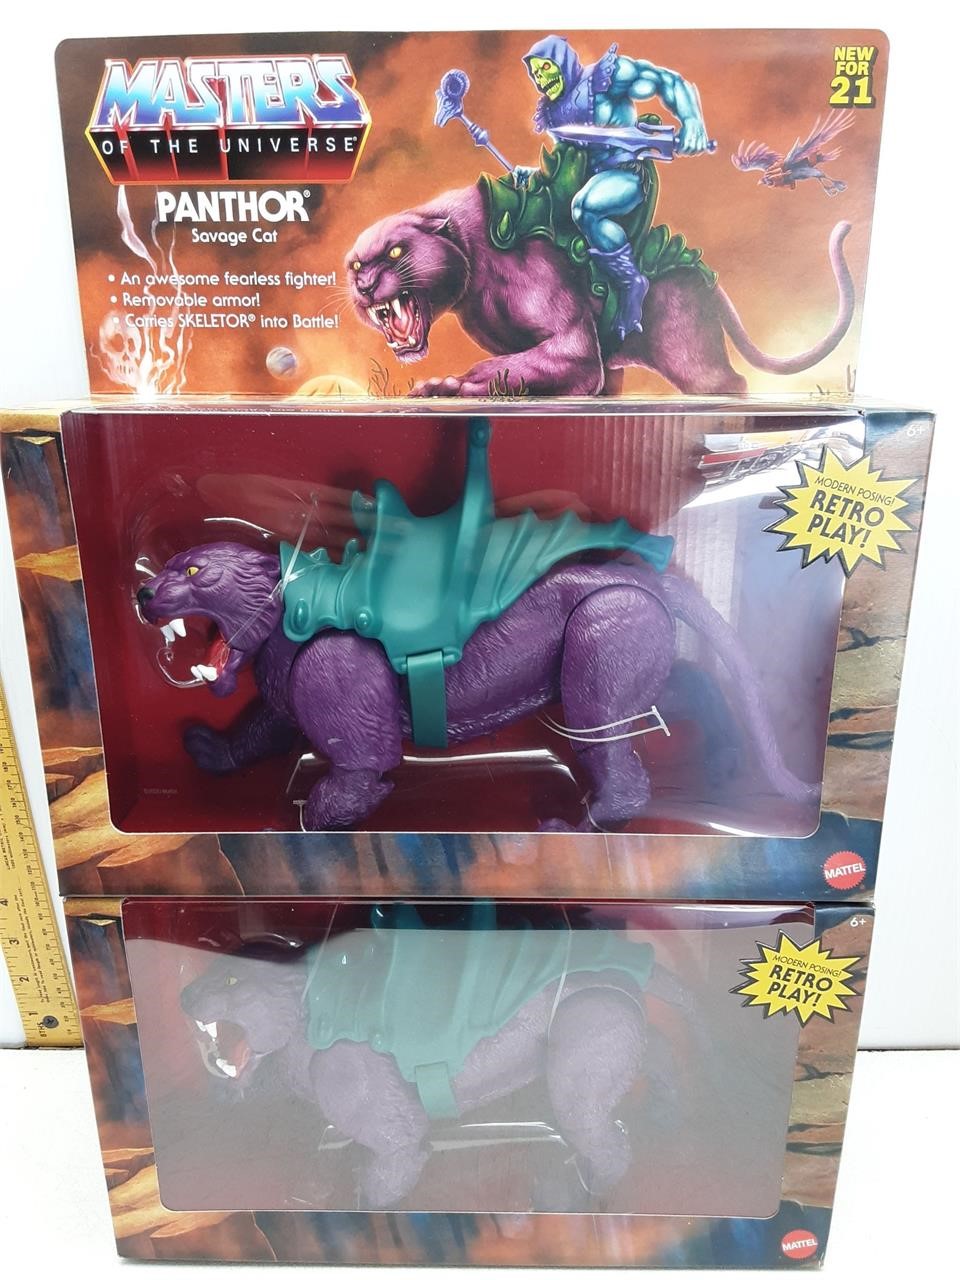 NEW MASTERS OF THE UNIVERSE PANTHOR ACTION FIGURE